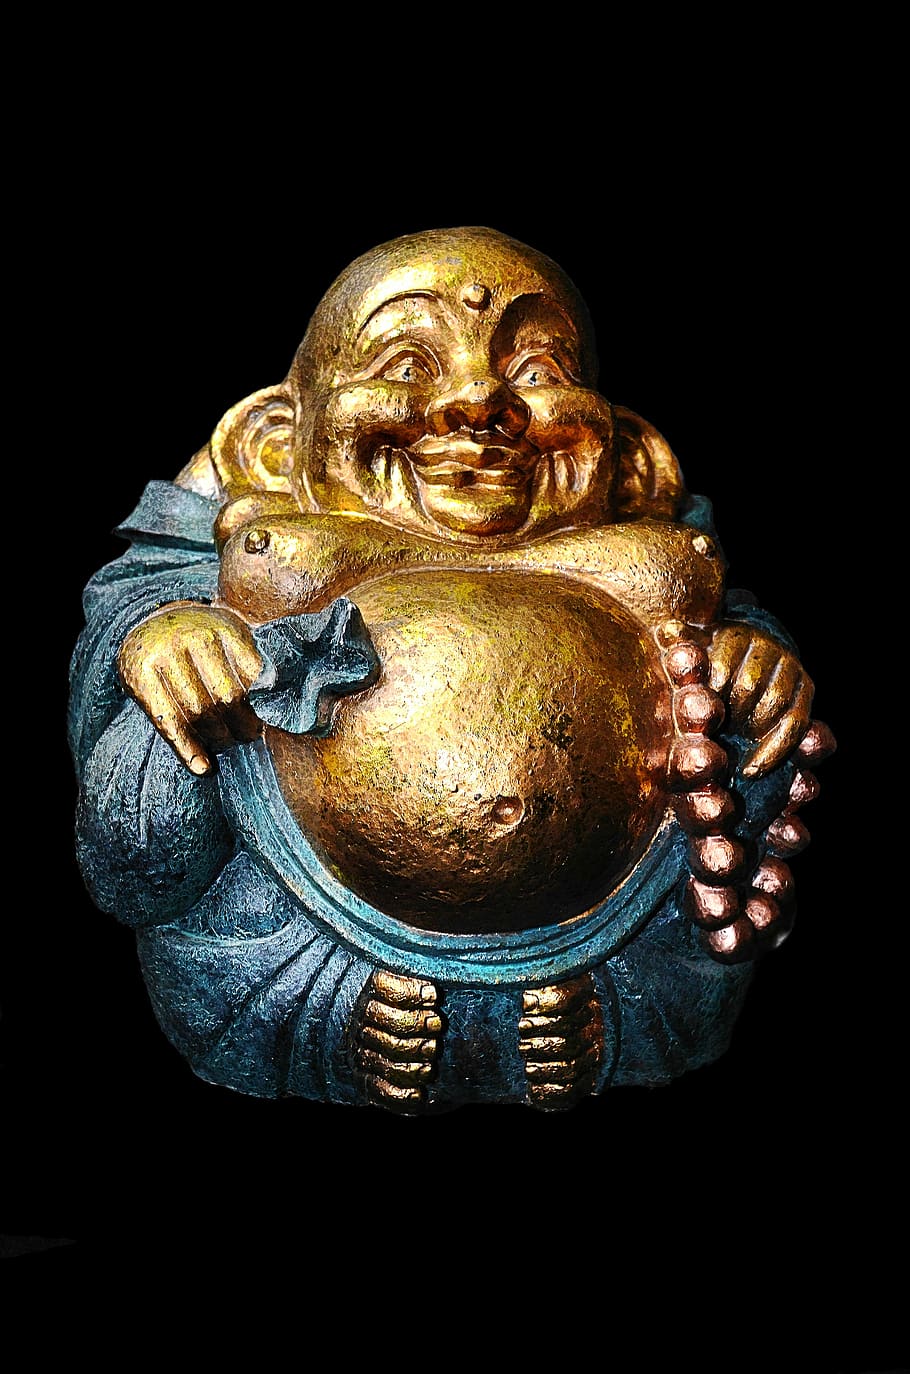 laughing, lucky, buddha, buddhism, statue, asian, buddhist, religion, sculpture, culture